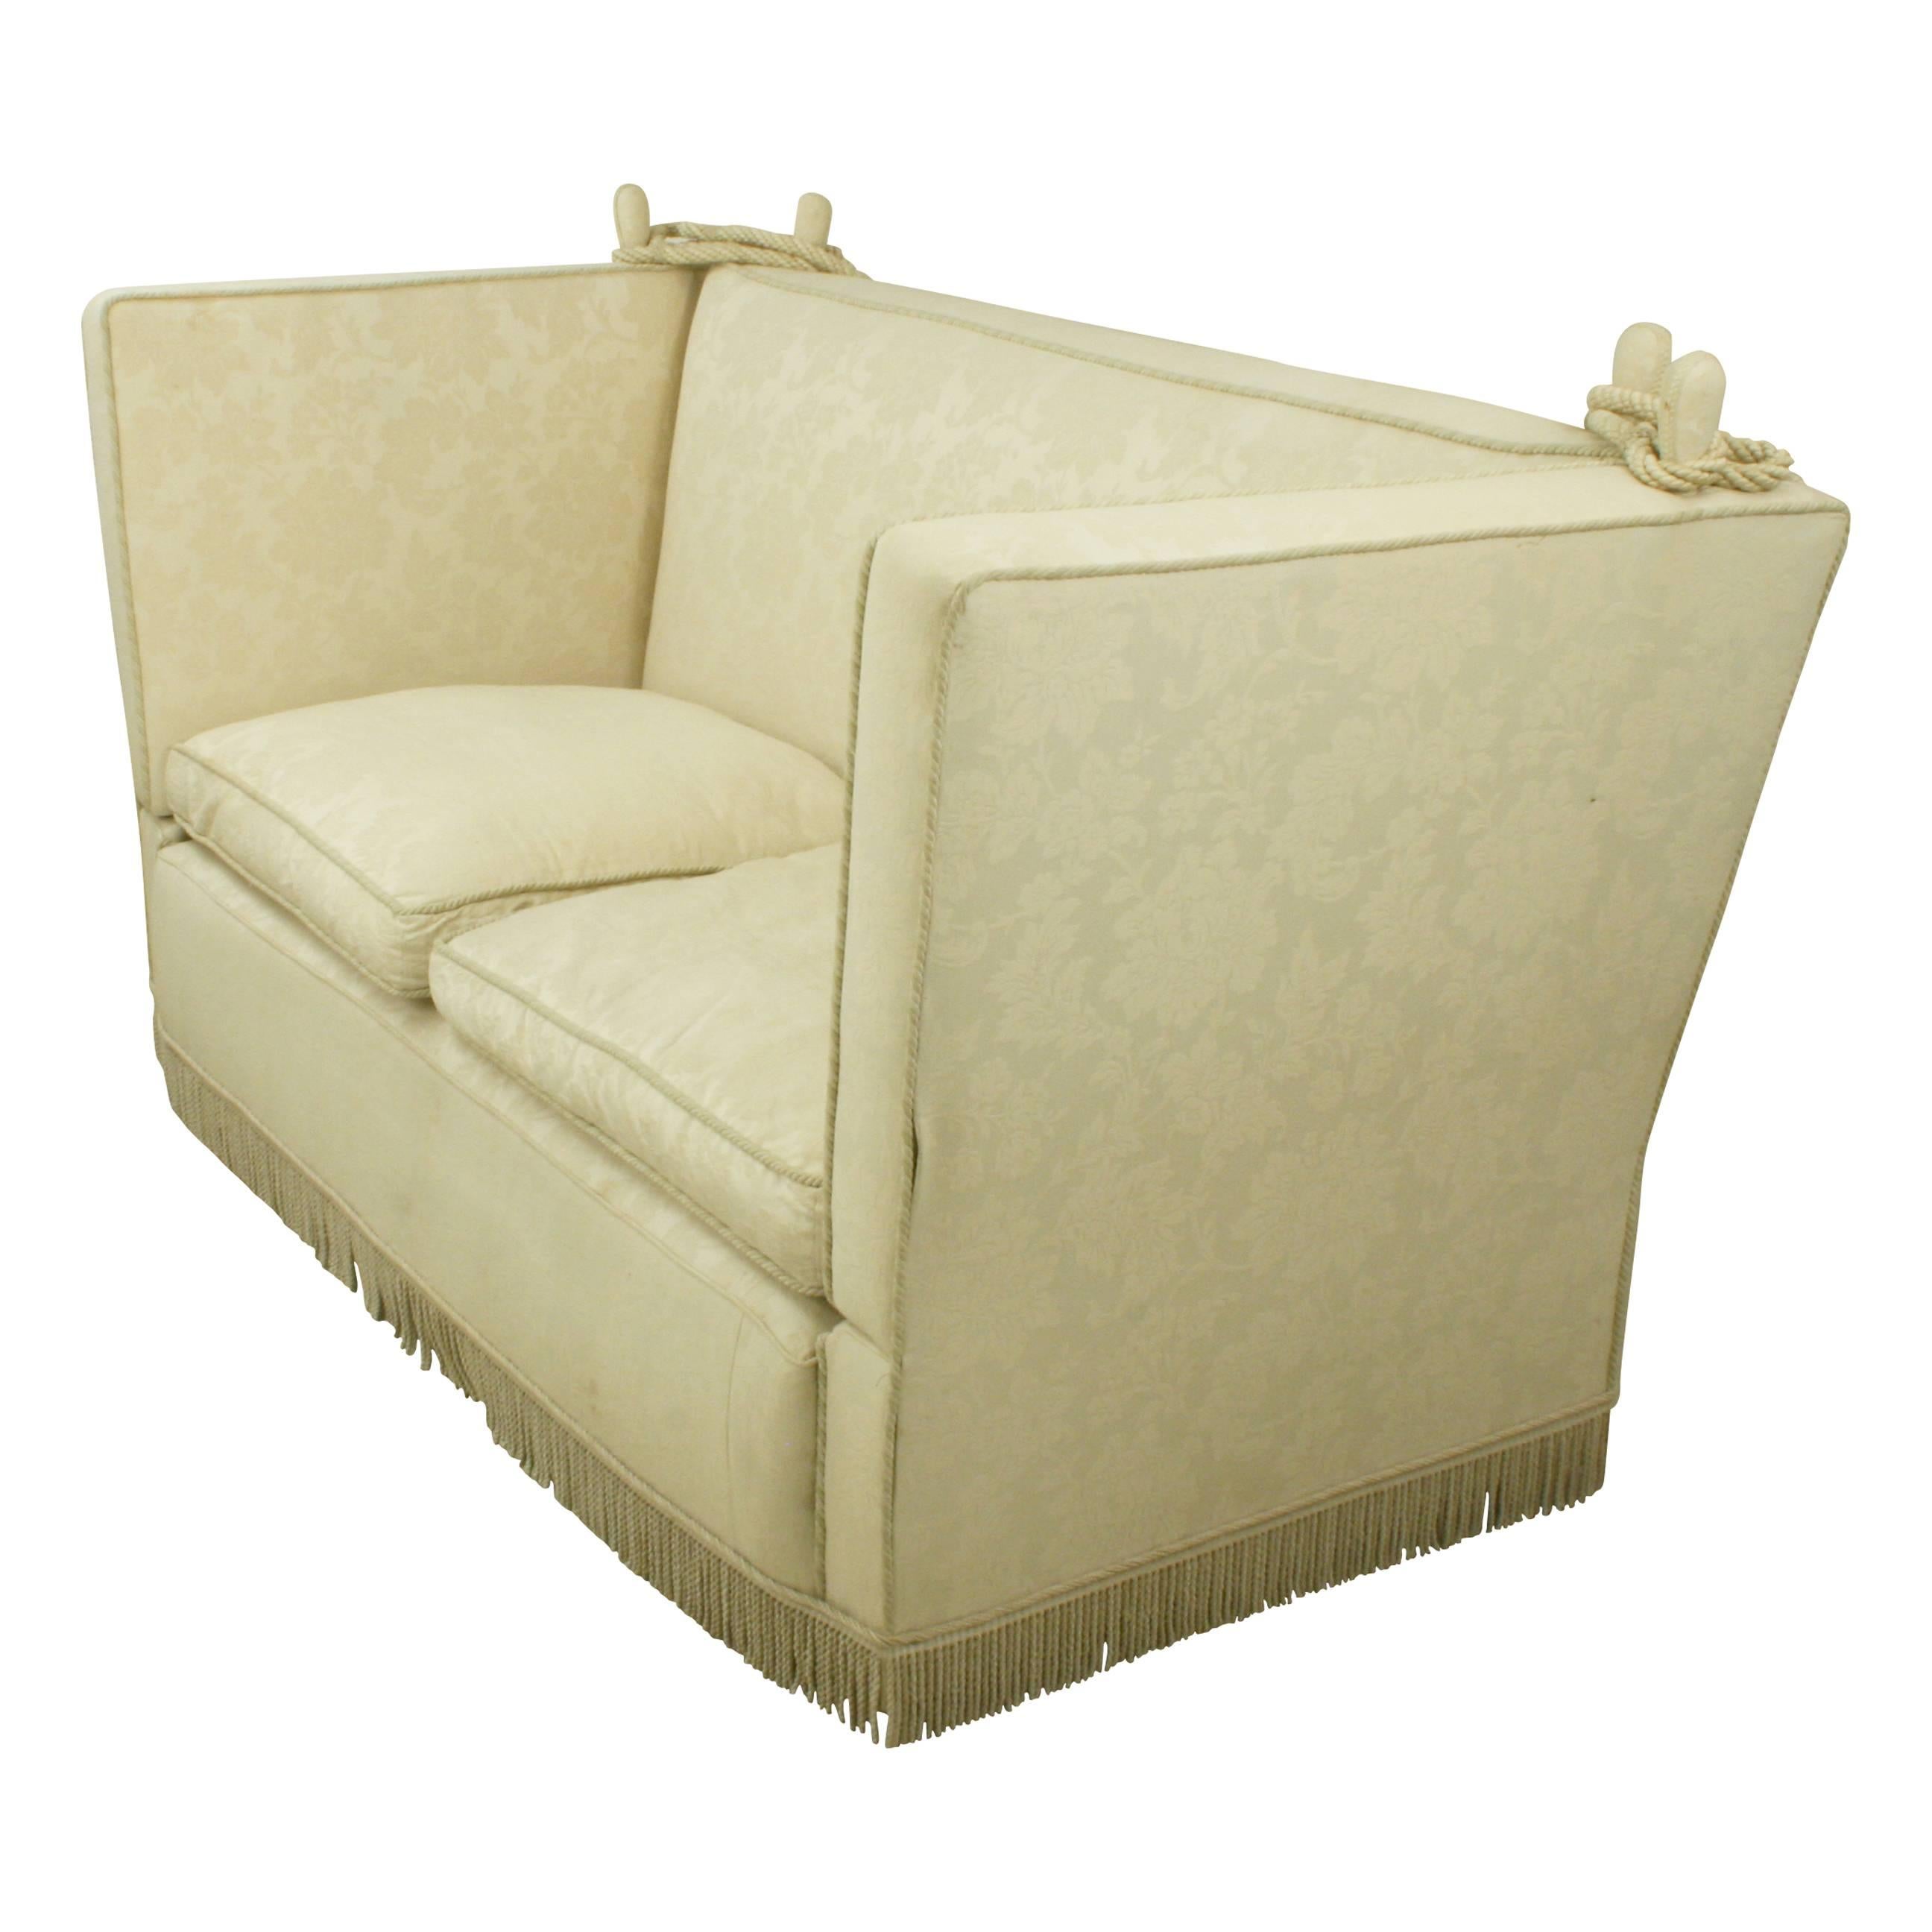 English Knole sofa.
A large two-seat Knole settee with adjustable arms, deep seating, cream fabric with fringing. The traditional Knole settee is raised up on castors with drop arms and heavy decorative braid tie backs with elaborate tassels and